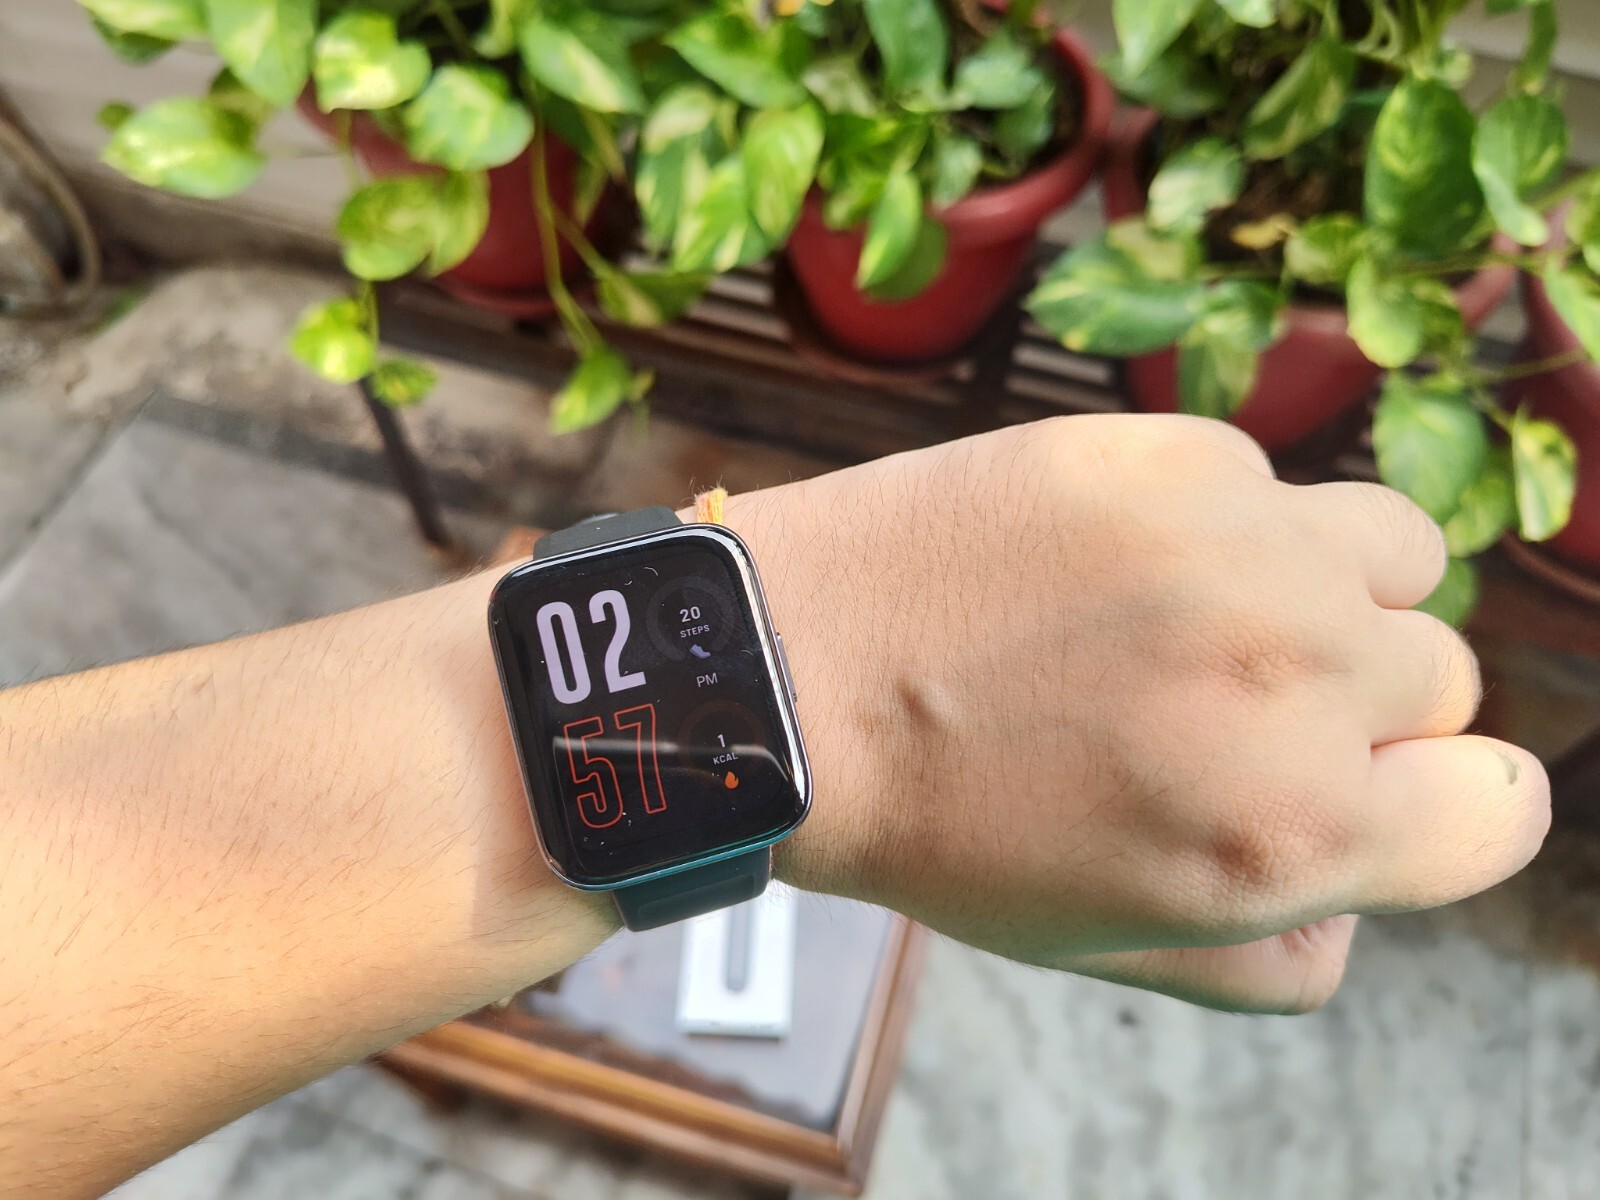 Amazfit Bip 3 (Pro) fully unveiled: now with GPS and bigger battery